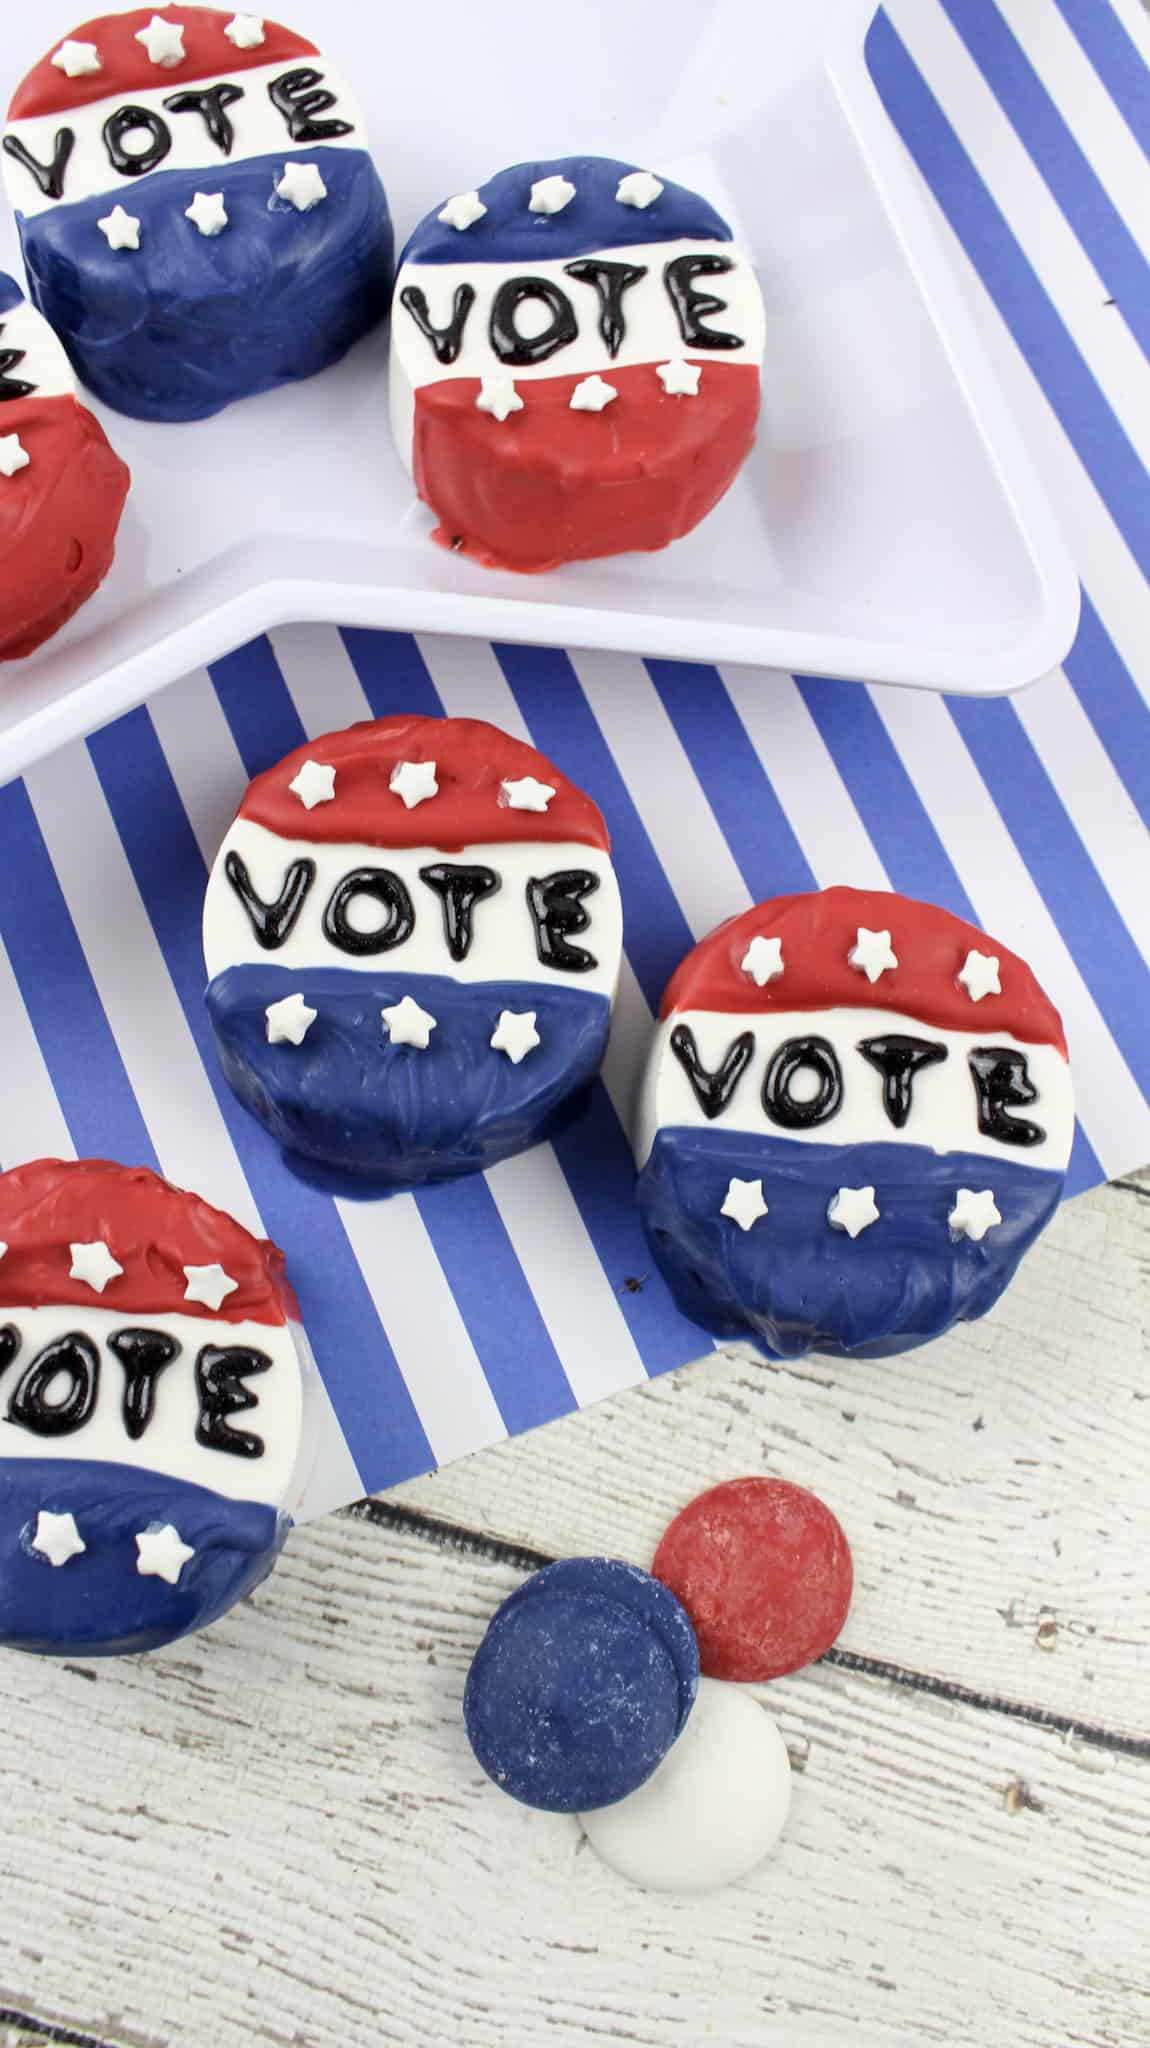 Election with Kids: Kid's Vote Snack Recipe